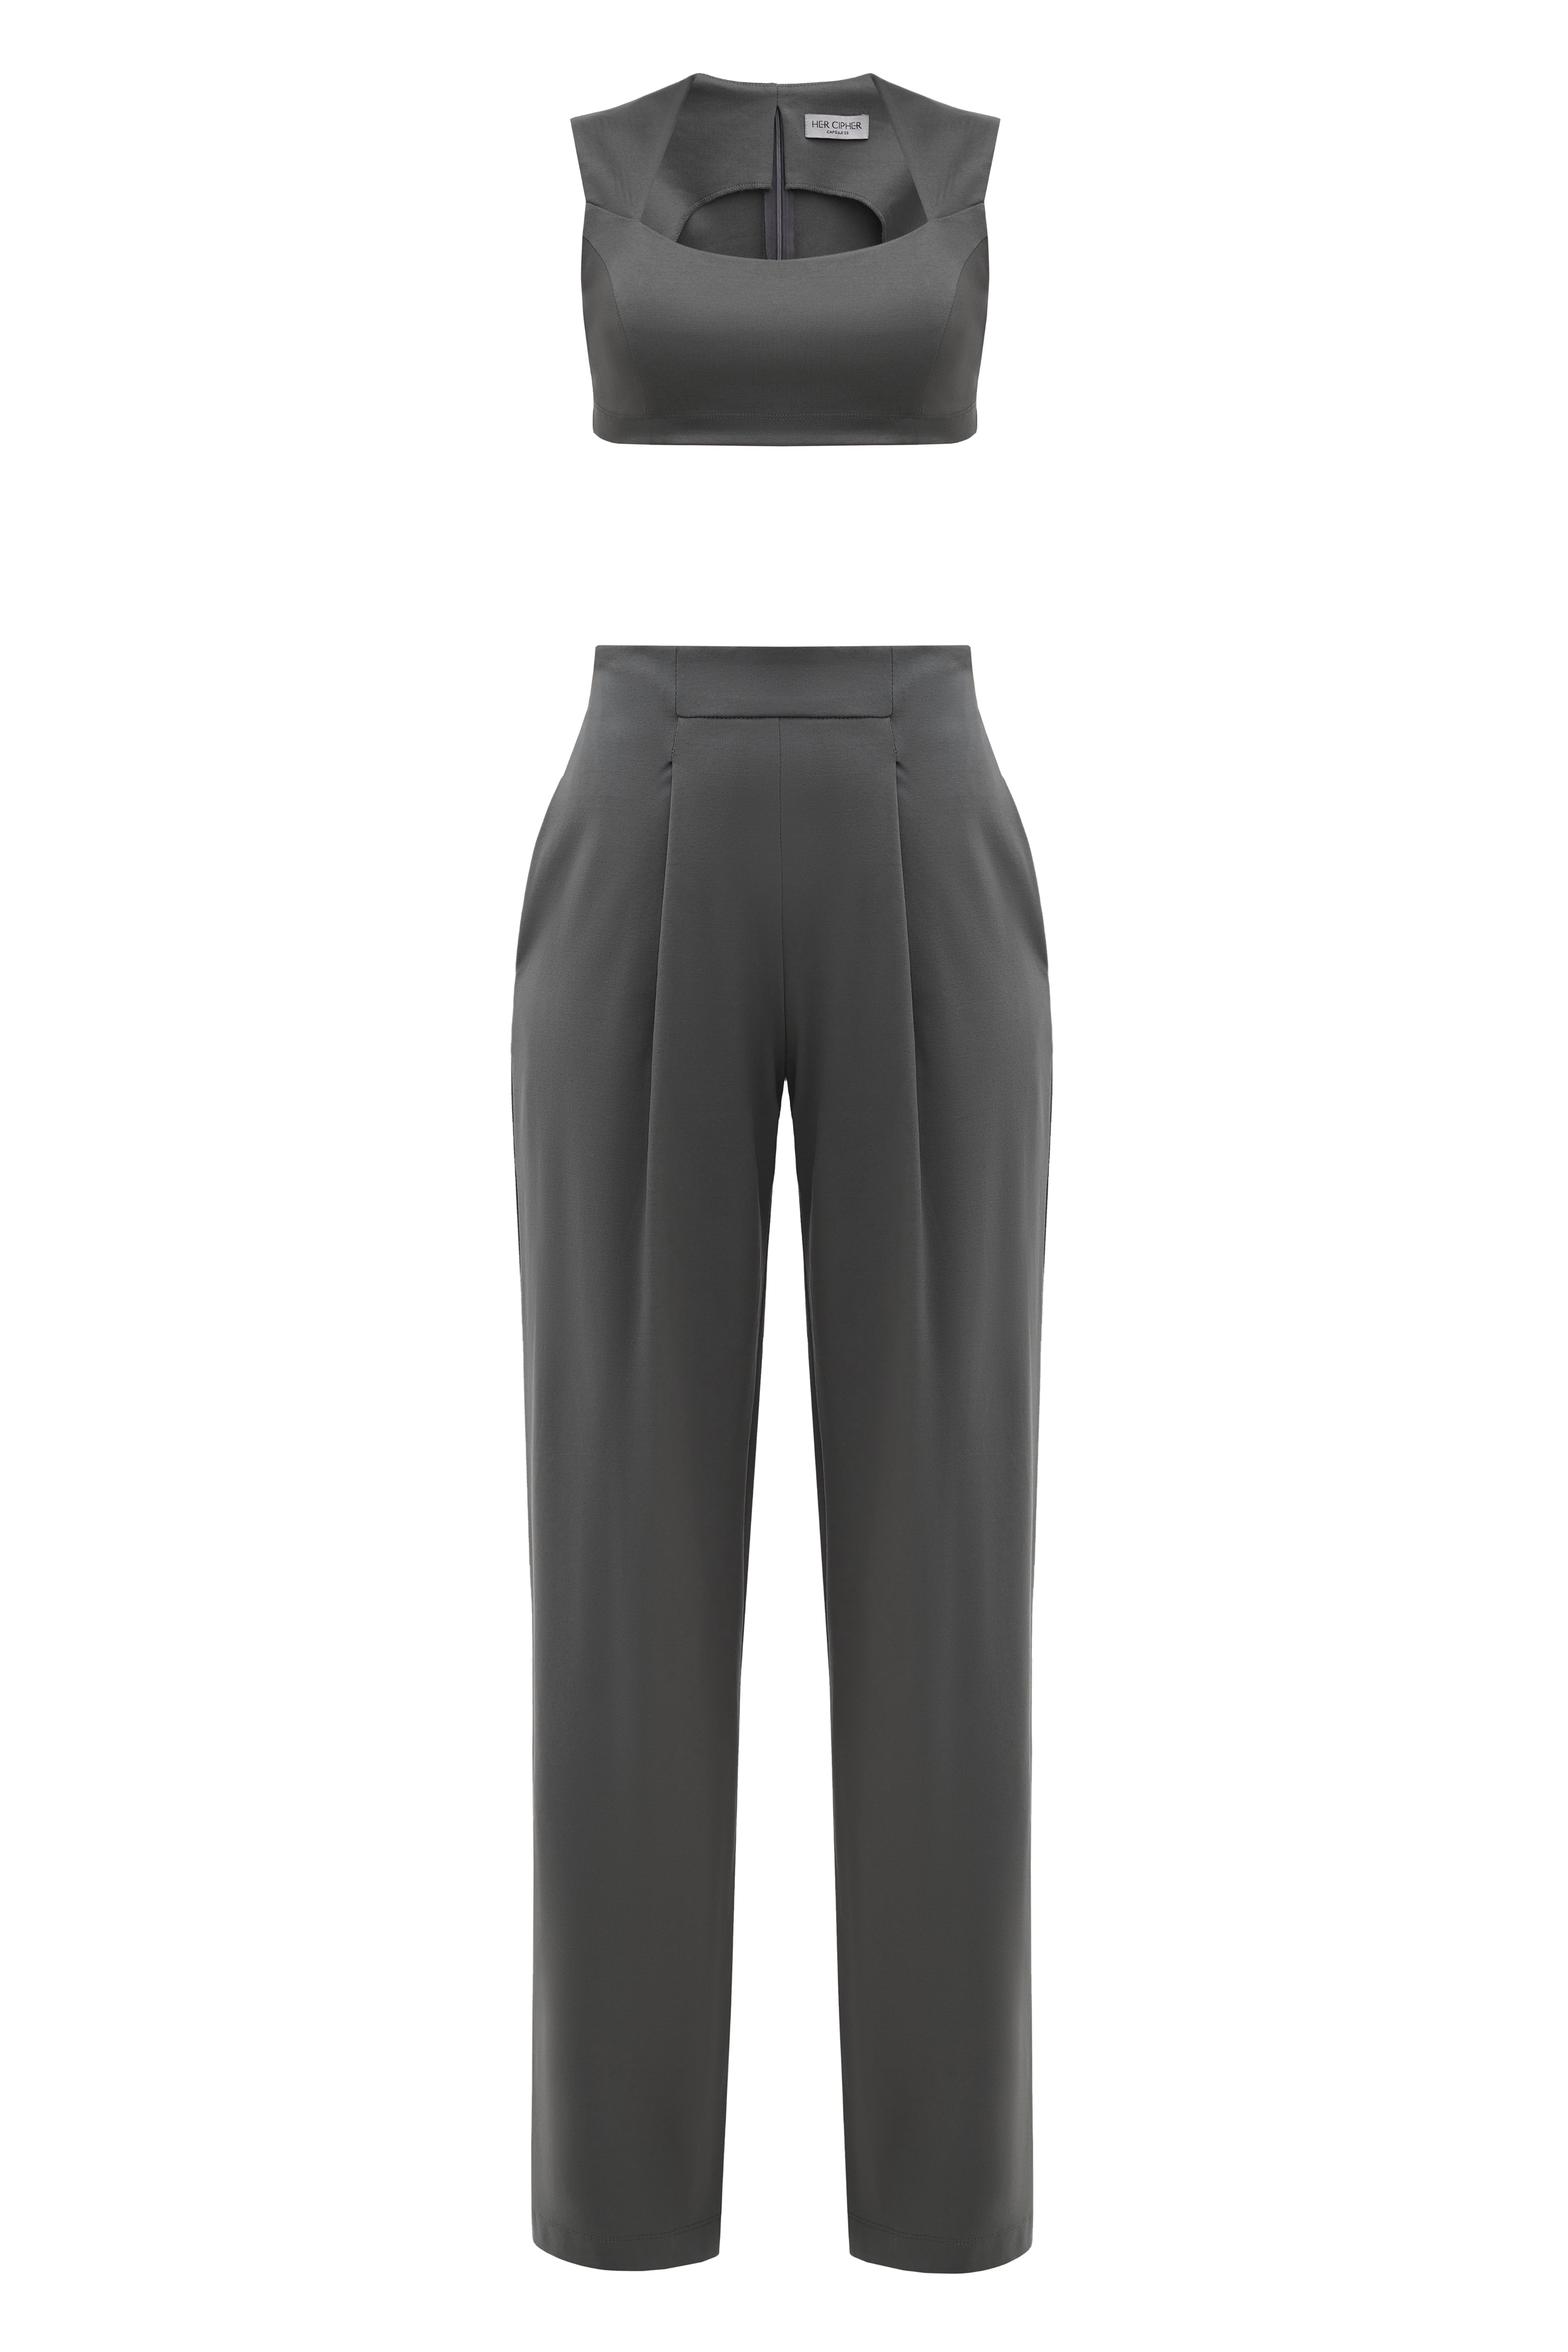 A set of a crop top with wide straps, square neckline and chest support, and high waited pleated wide leg pants in grey color by HER CIPHER